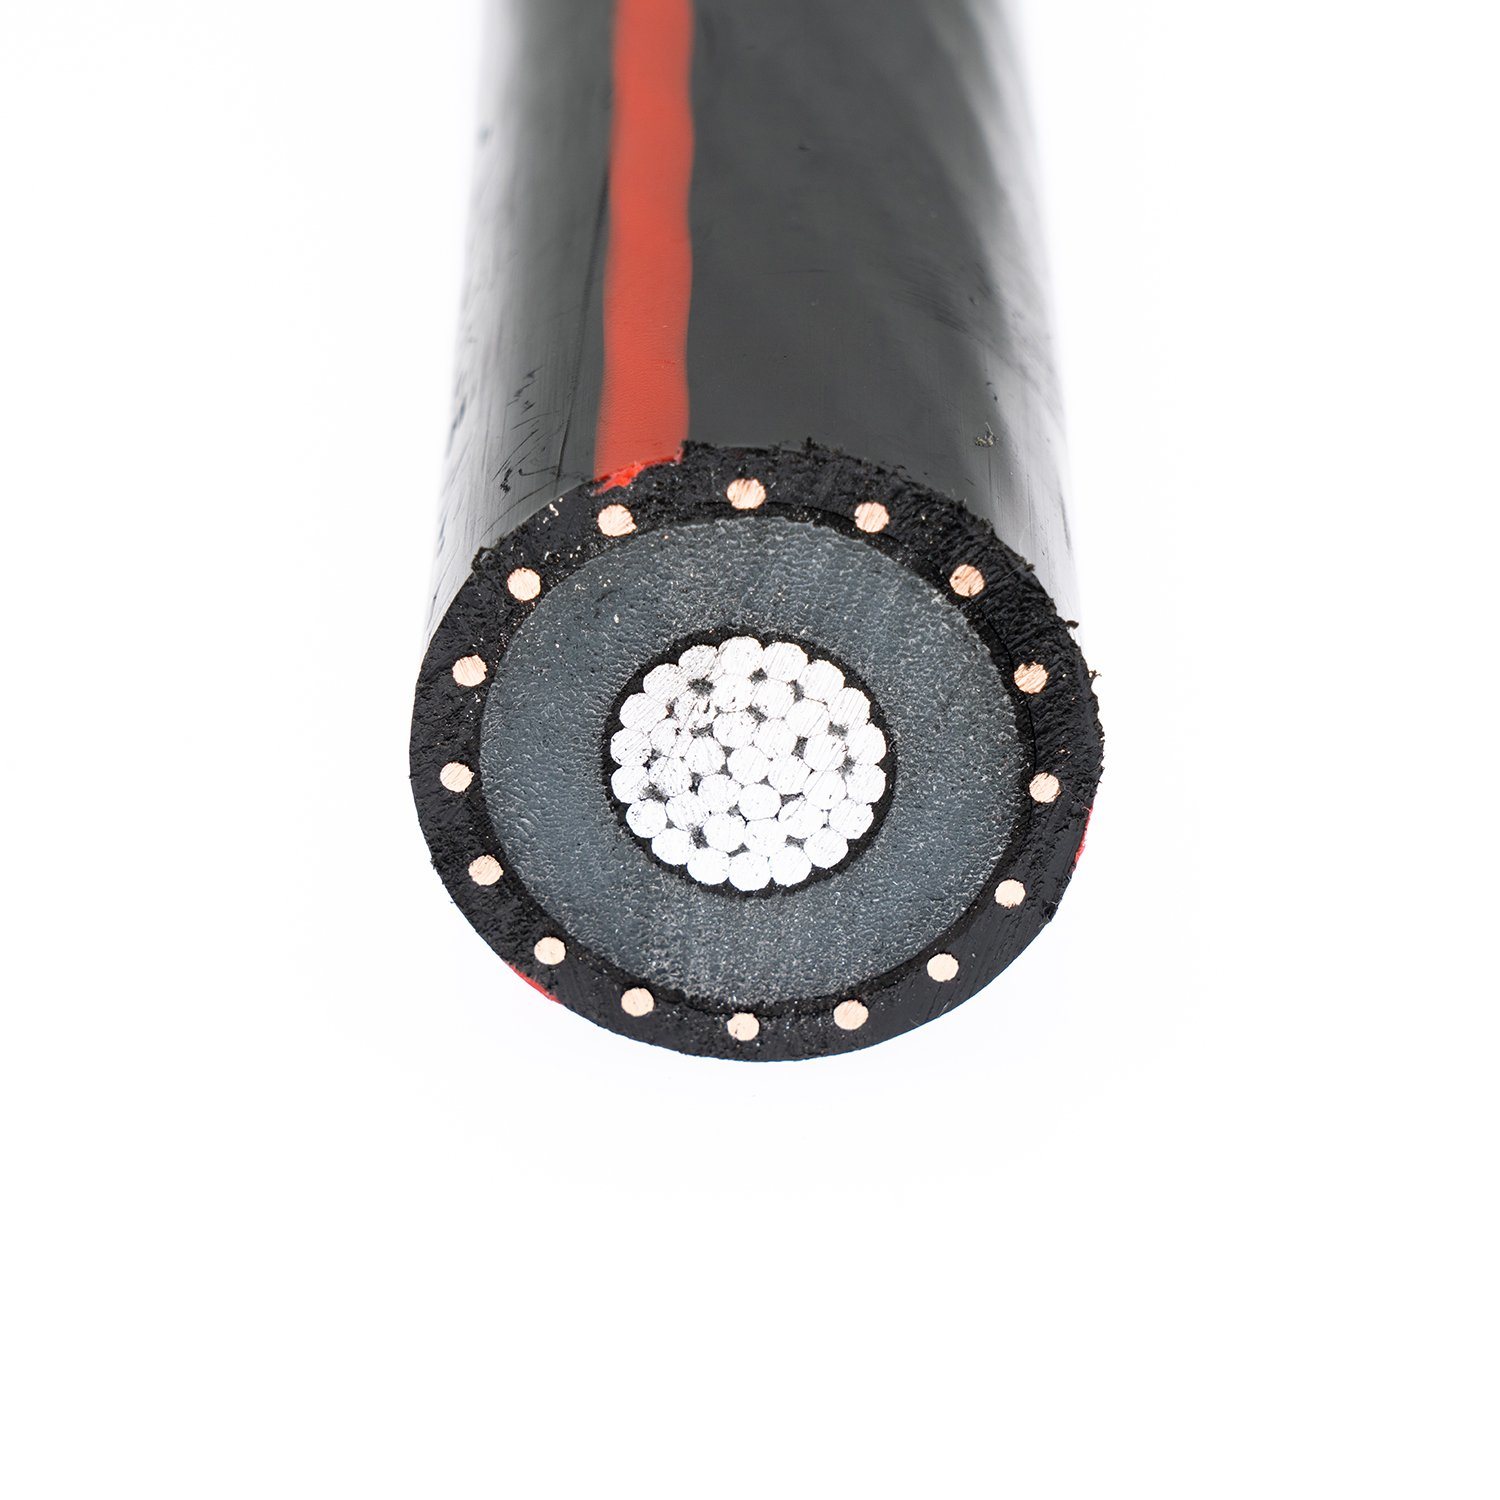 China Manufacturer UL Approval 25kv Aluminum Power Cable 1/3 Neutral Cws Shield 100% LLDPE Insulation Type Mv-90 with Specification